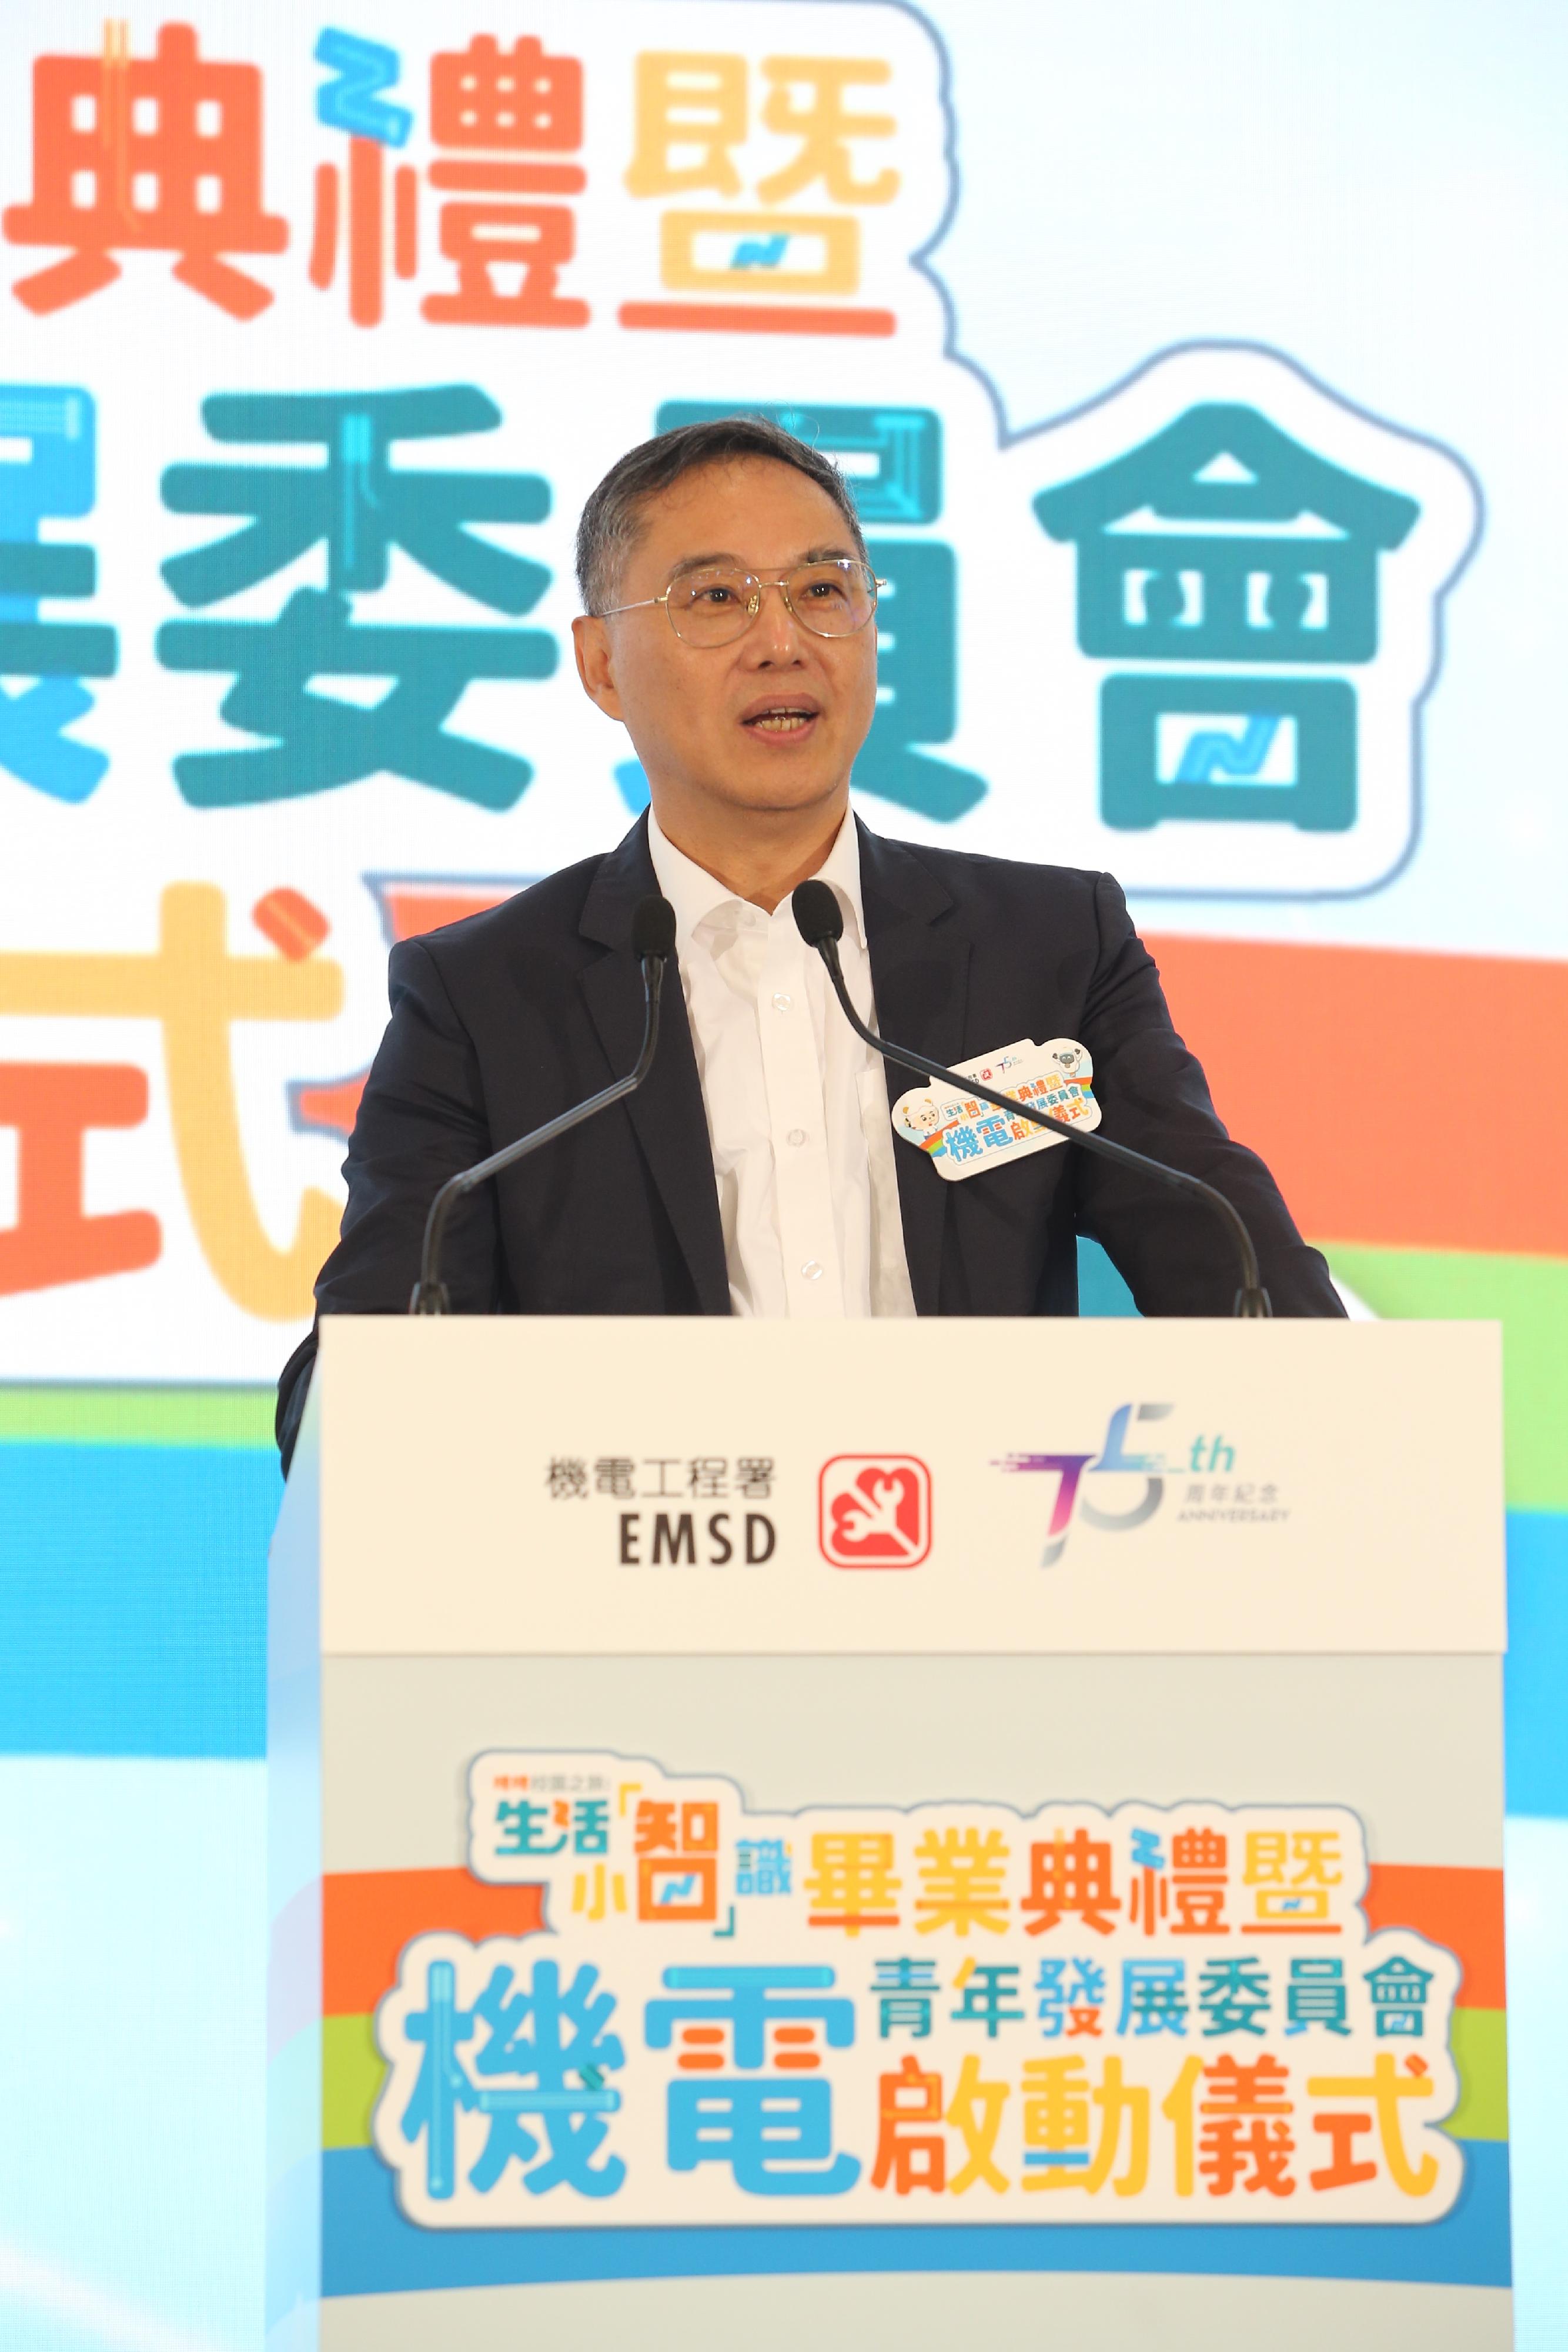 The Electrical and Mechanical Services Department held the "Witty Bear Campus Tour – EMbrace Smart Living in Daily Life" graduation ceremony and the E&M Youth Development Committee launching ceremony today (July 6). Photo shows the Permanent Secretary for Development (Works), Mr Ricky Lau, speaking at the ceremony.